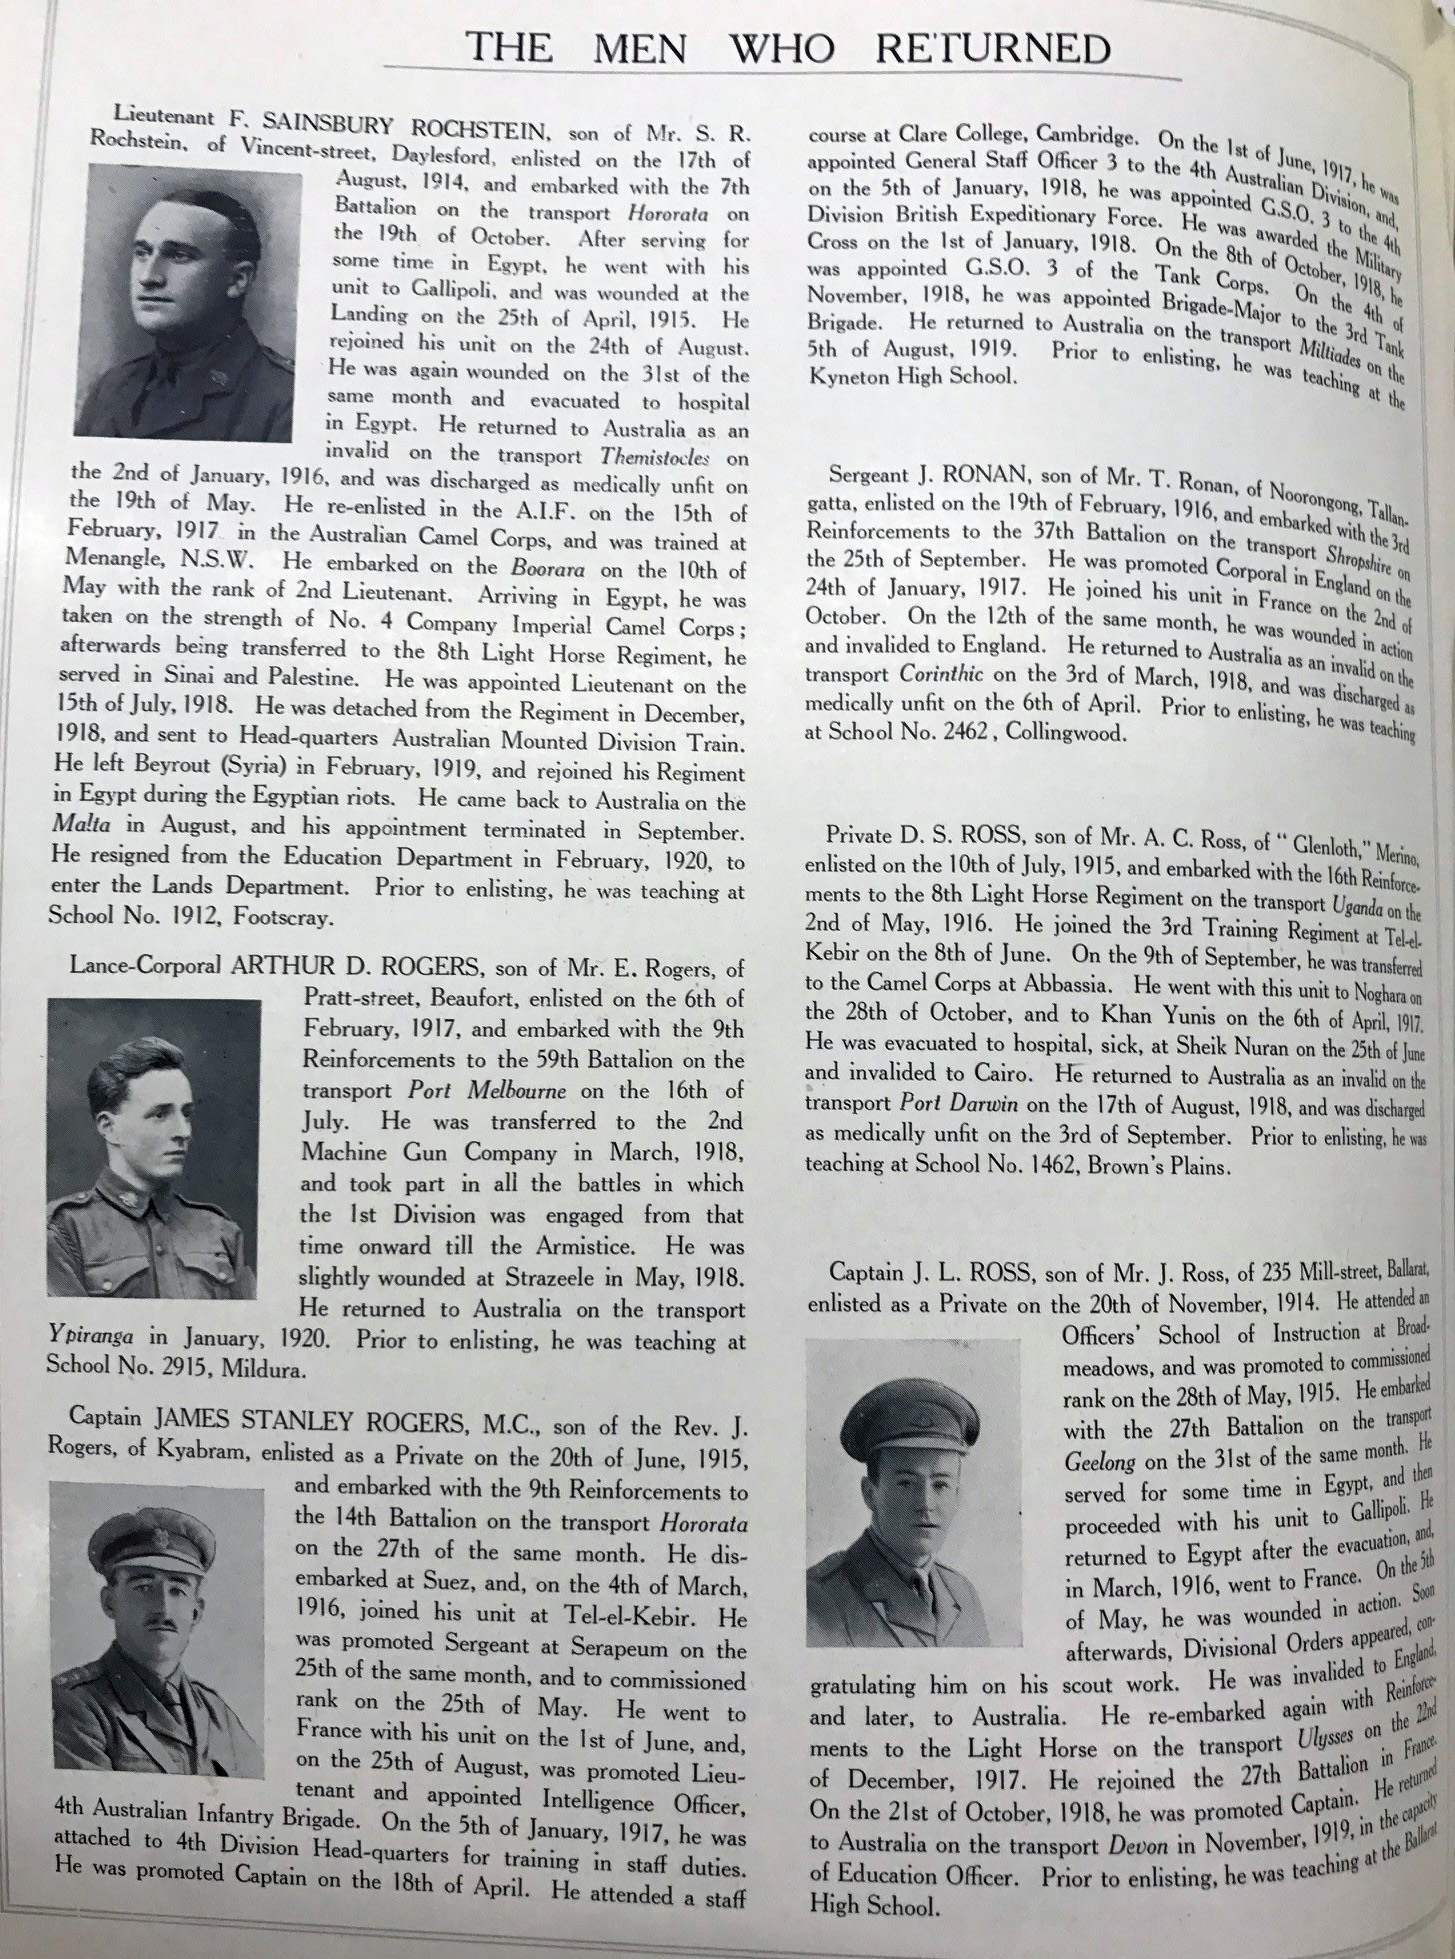 Page featuring bios and portraits